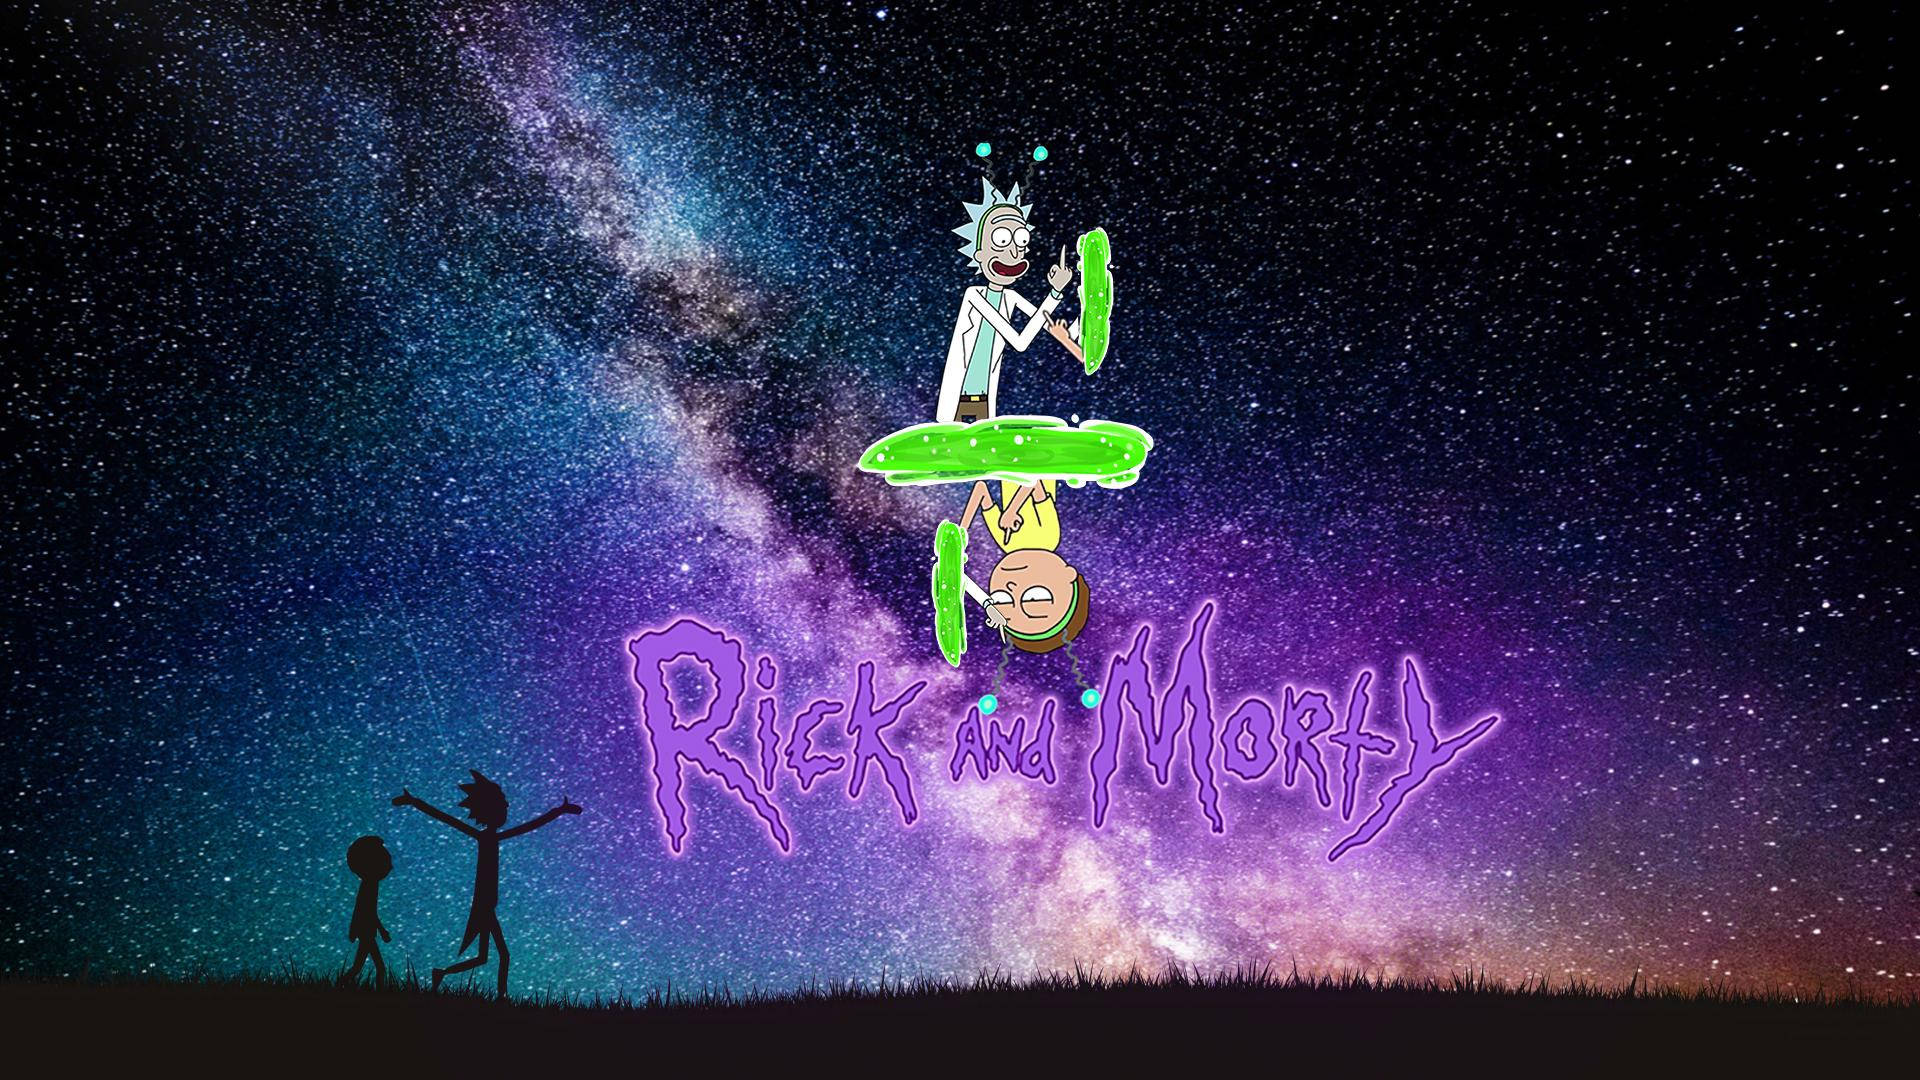 Rick And Morty Having Fun With Interdimensional Portals Background